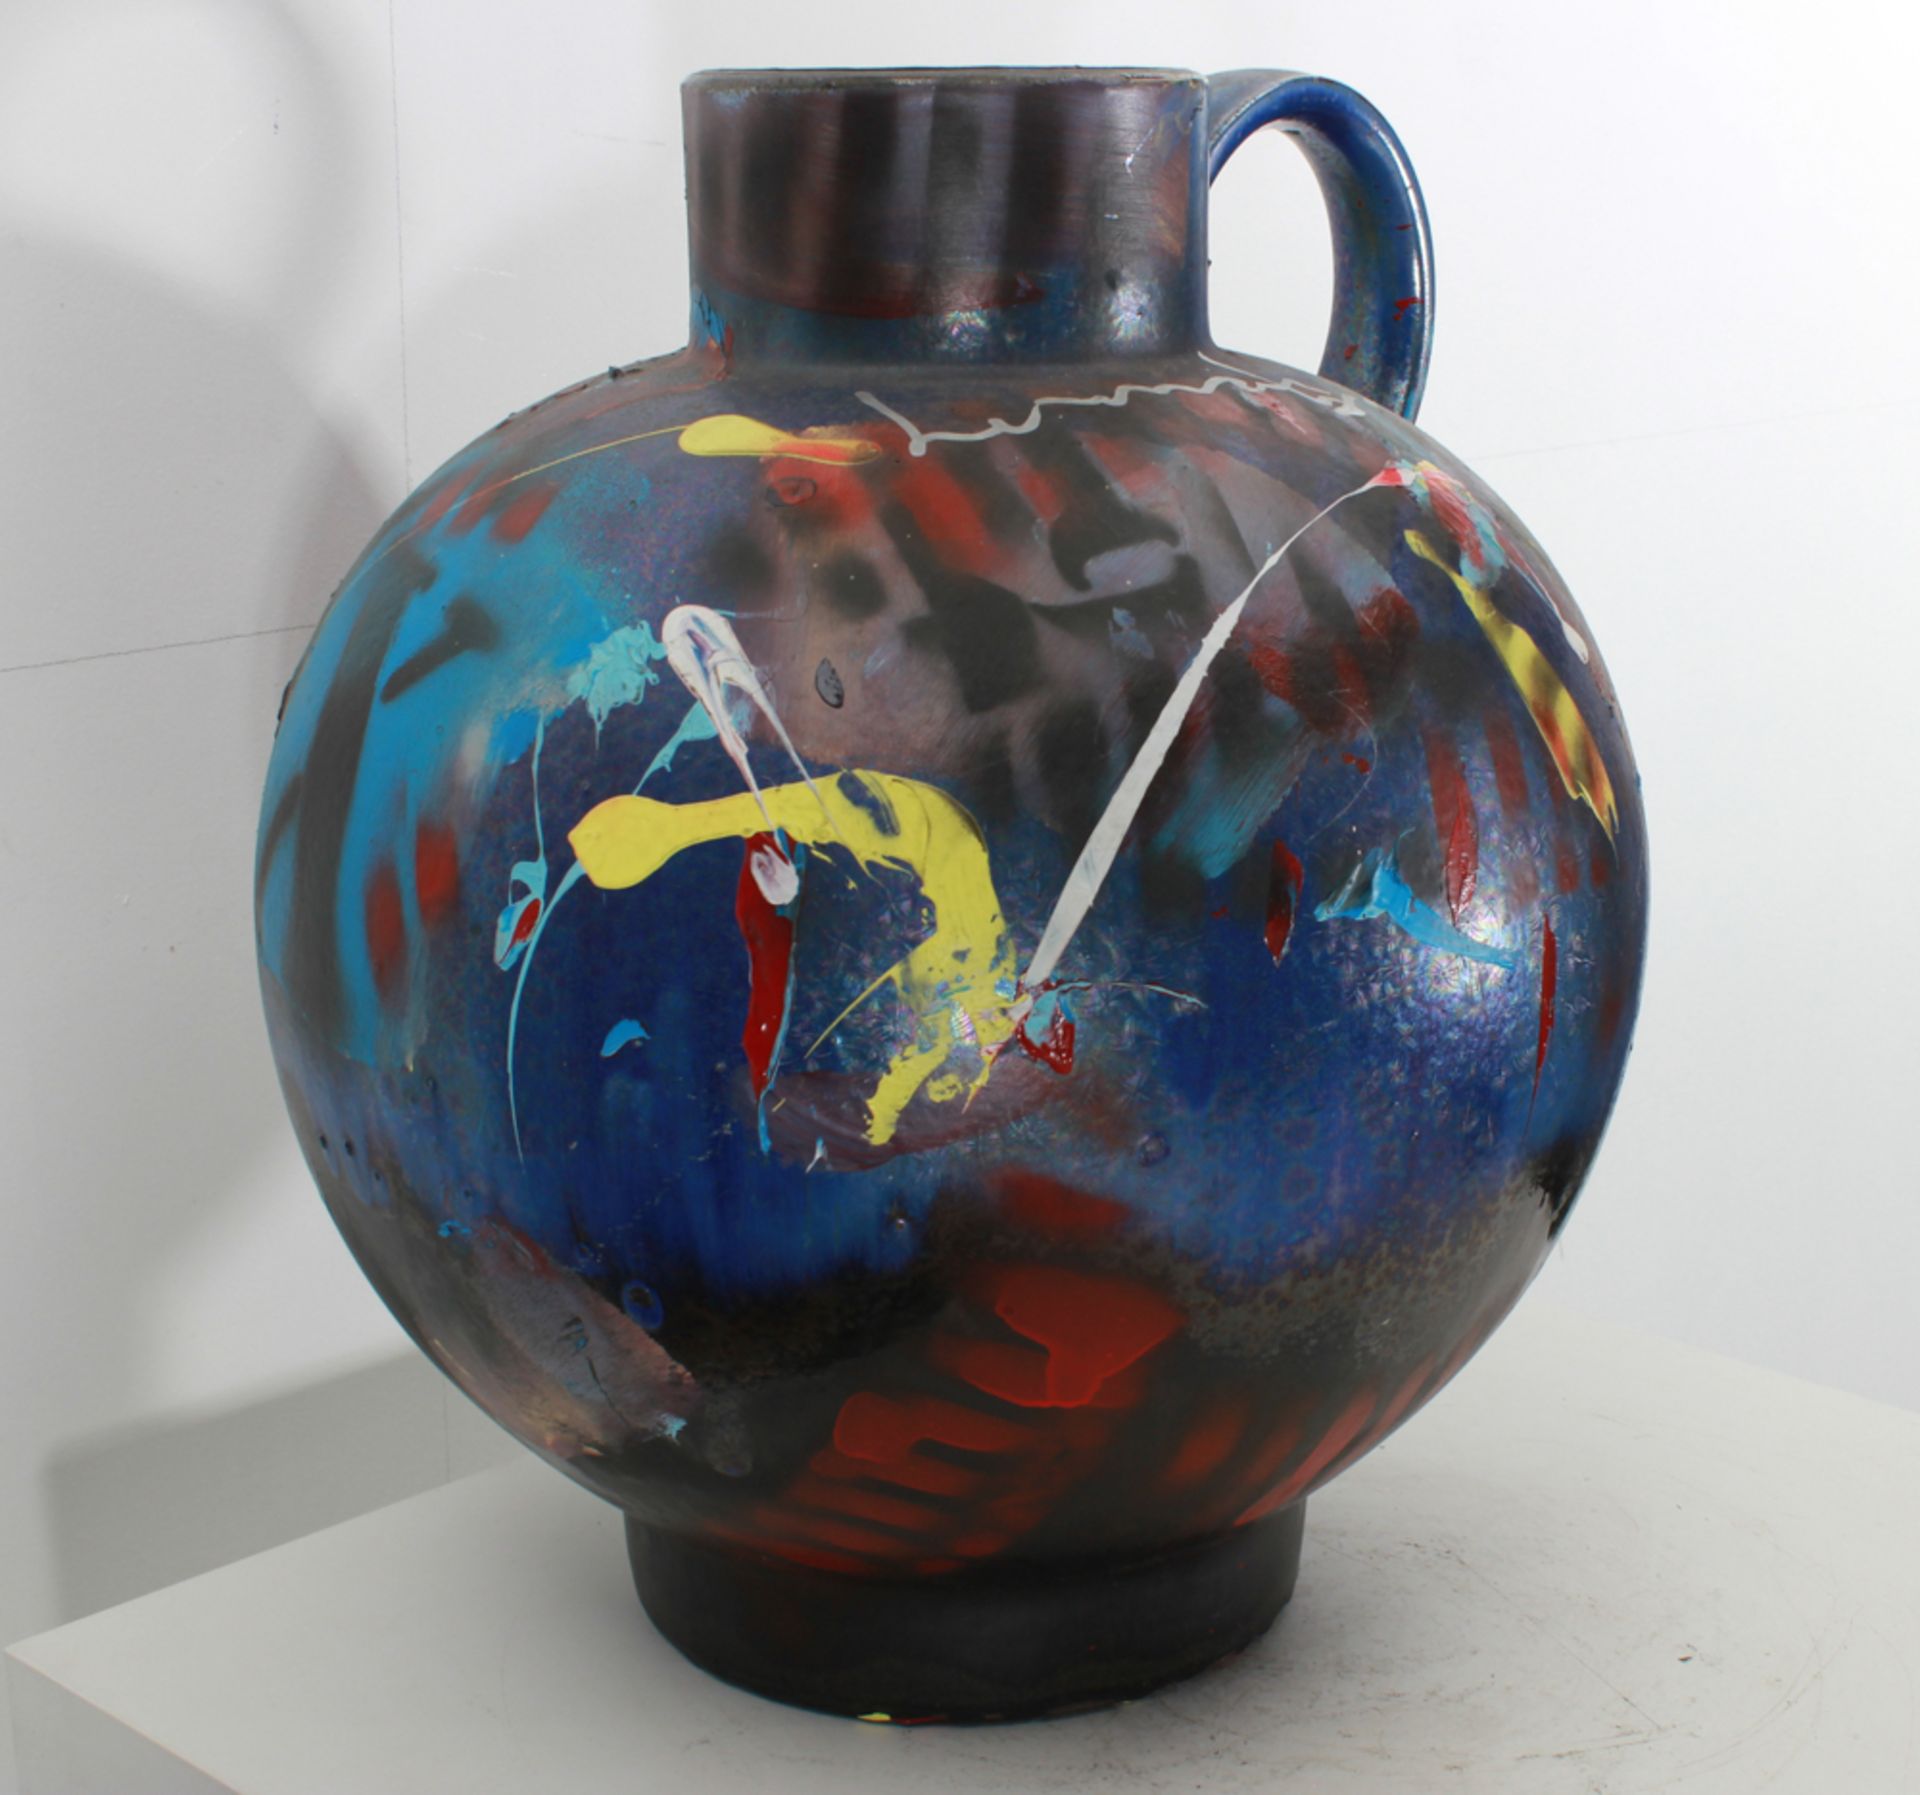 Herman Brood (1946 - 2001) Object from and get: Herman Brood, ** vase **, with certificate from Koos - Image 3 of 10